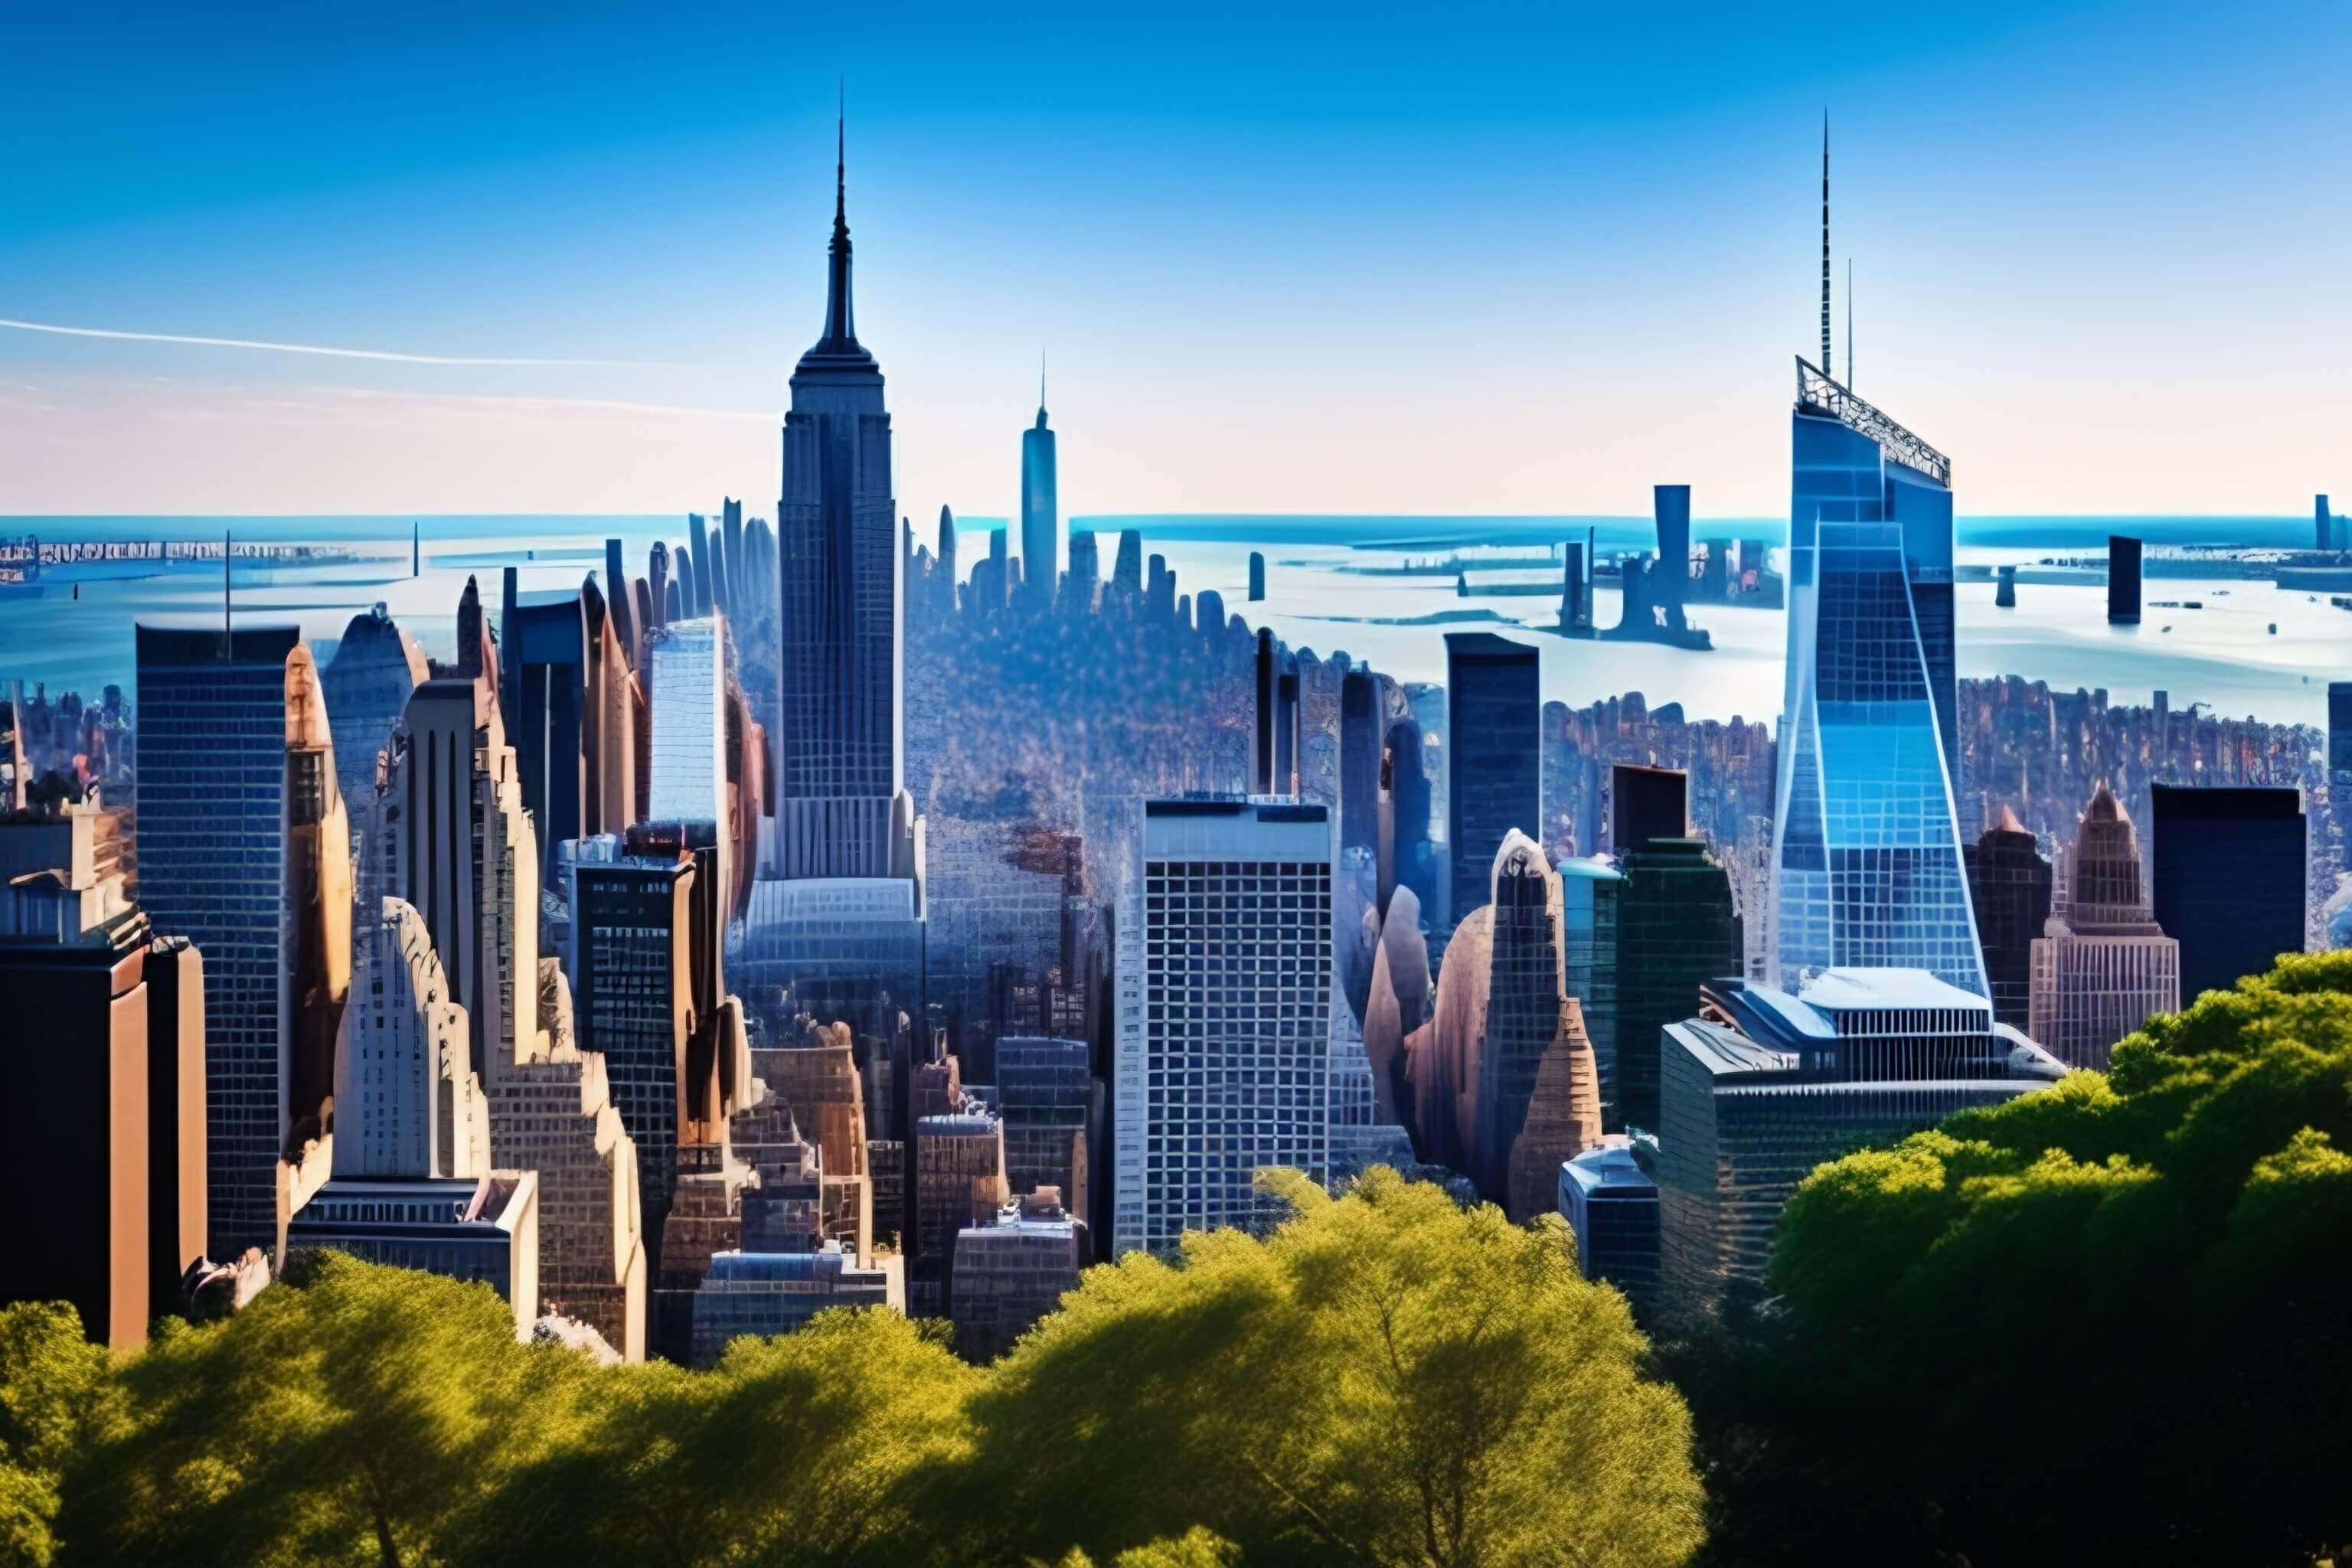 8. New York City 🍎: The Big Apple's Unparalleled Buzz